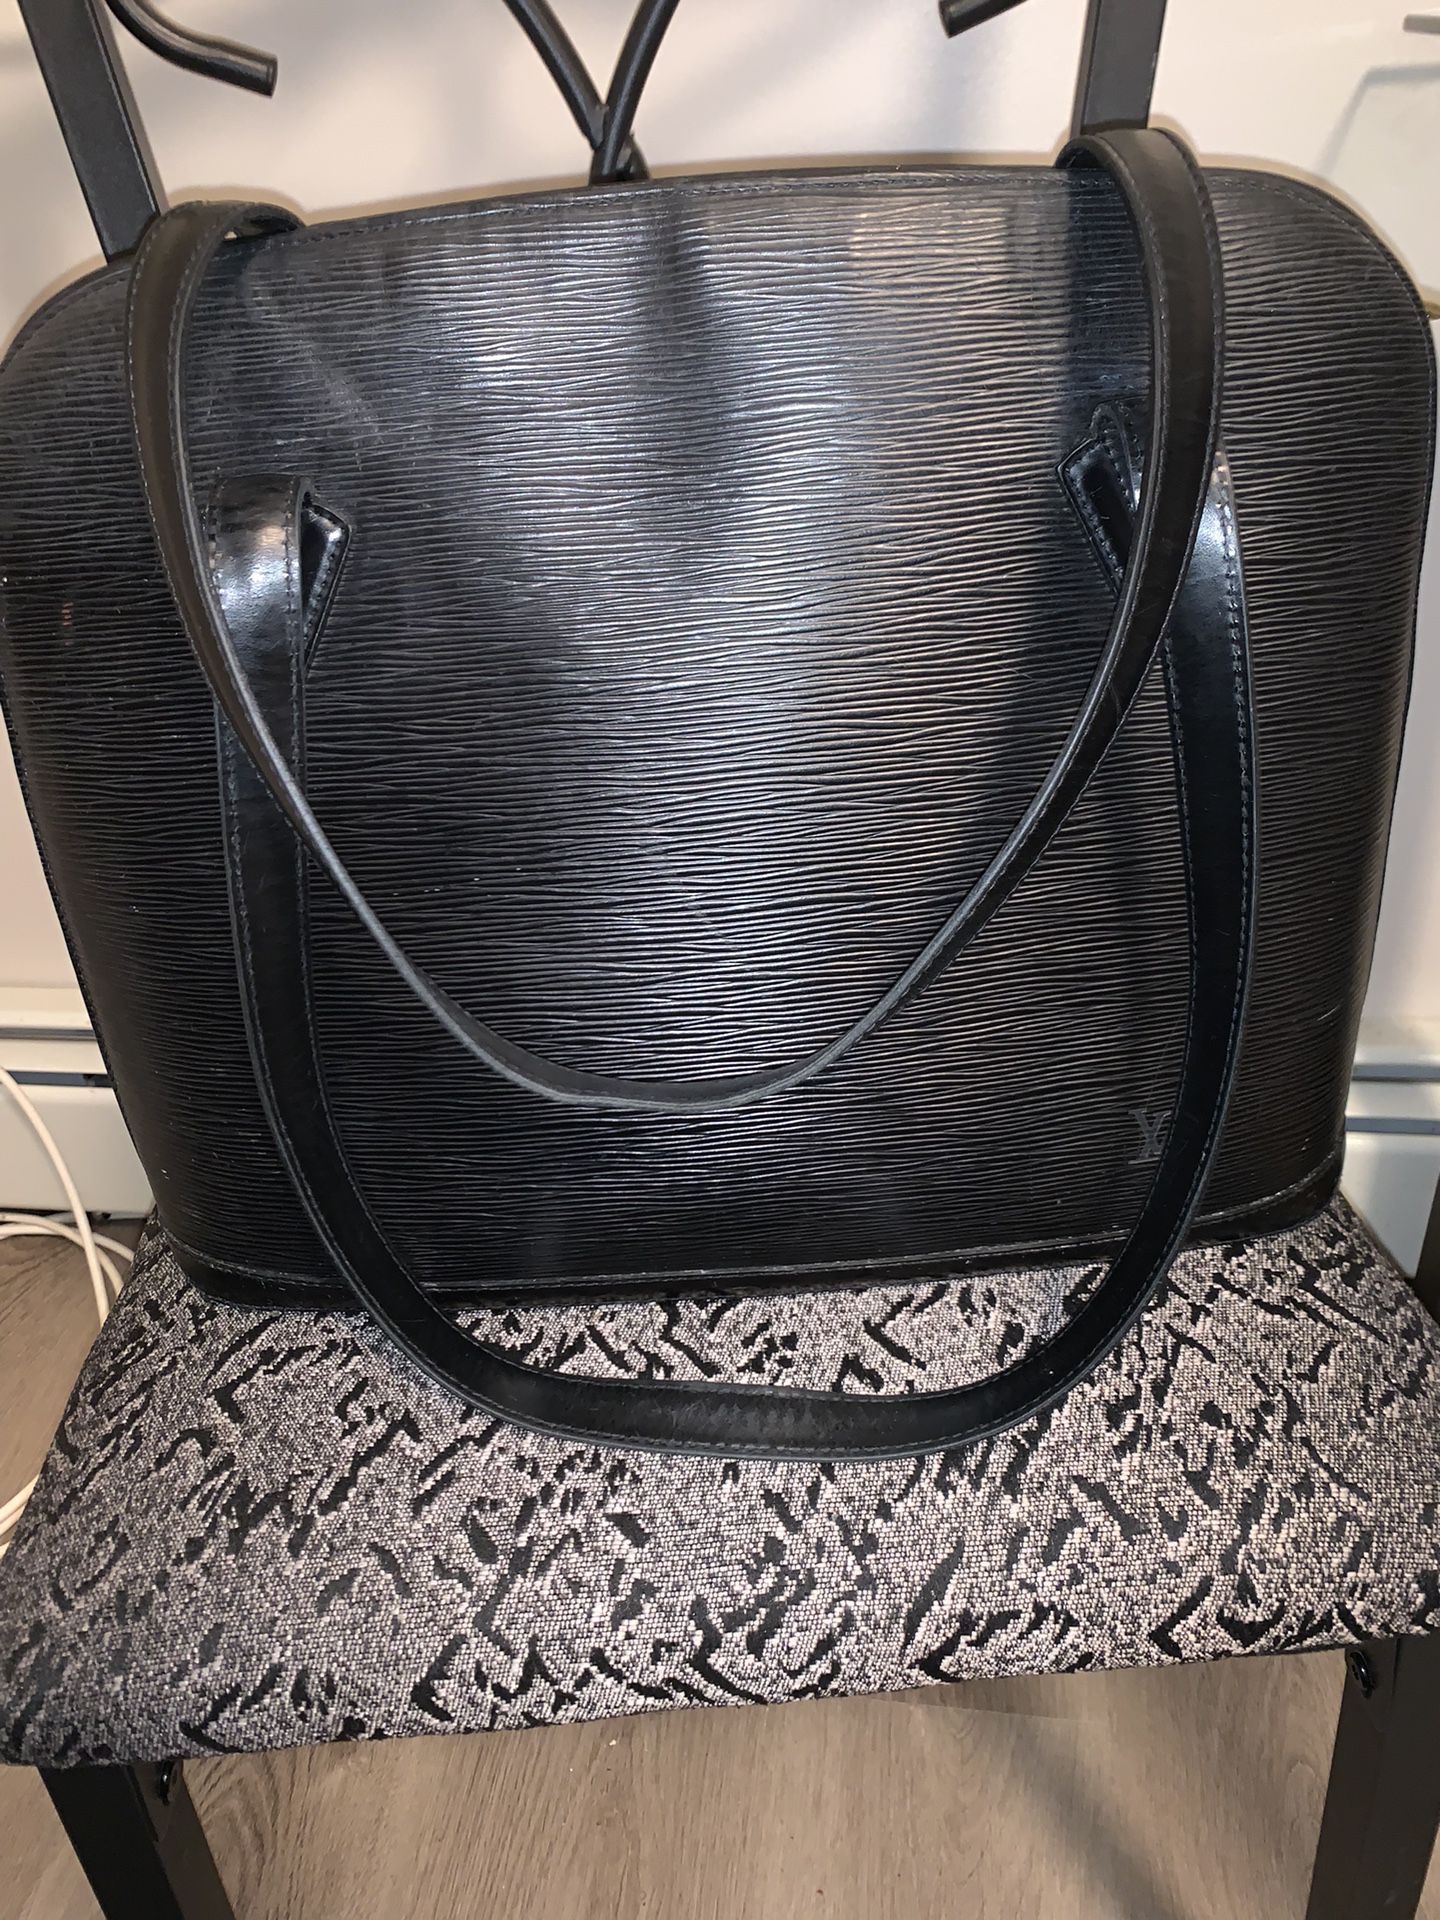 Louis Vuitton Epi Alma for Sale in New York, NY - OfferUp